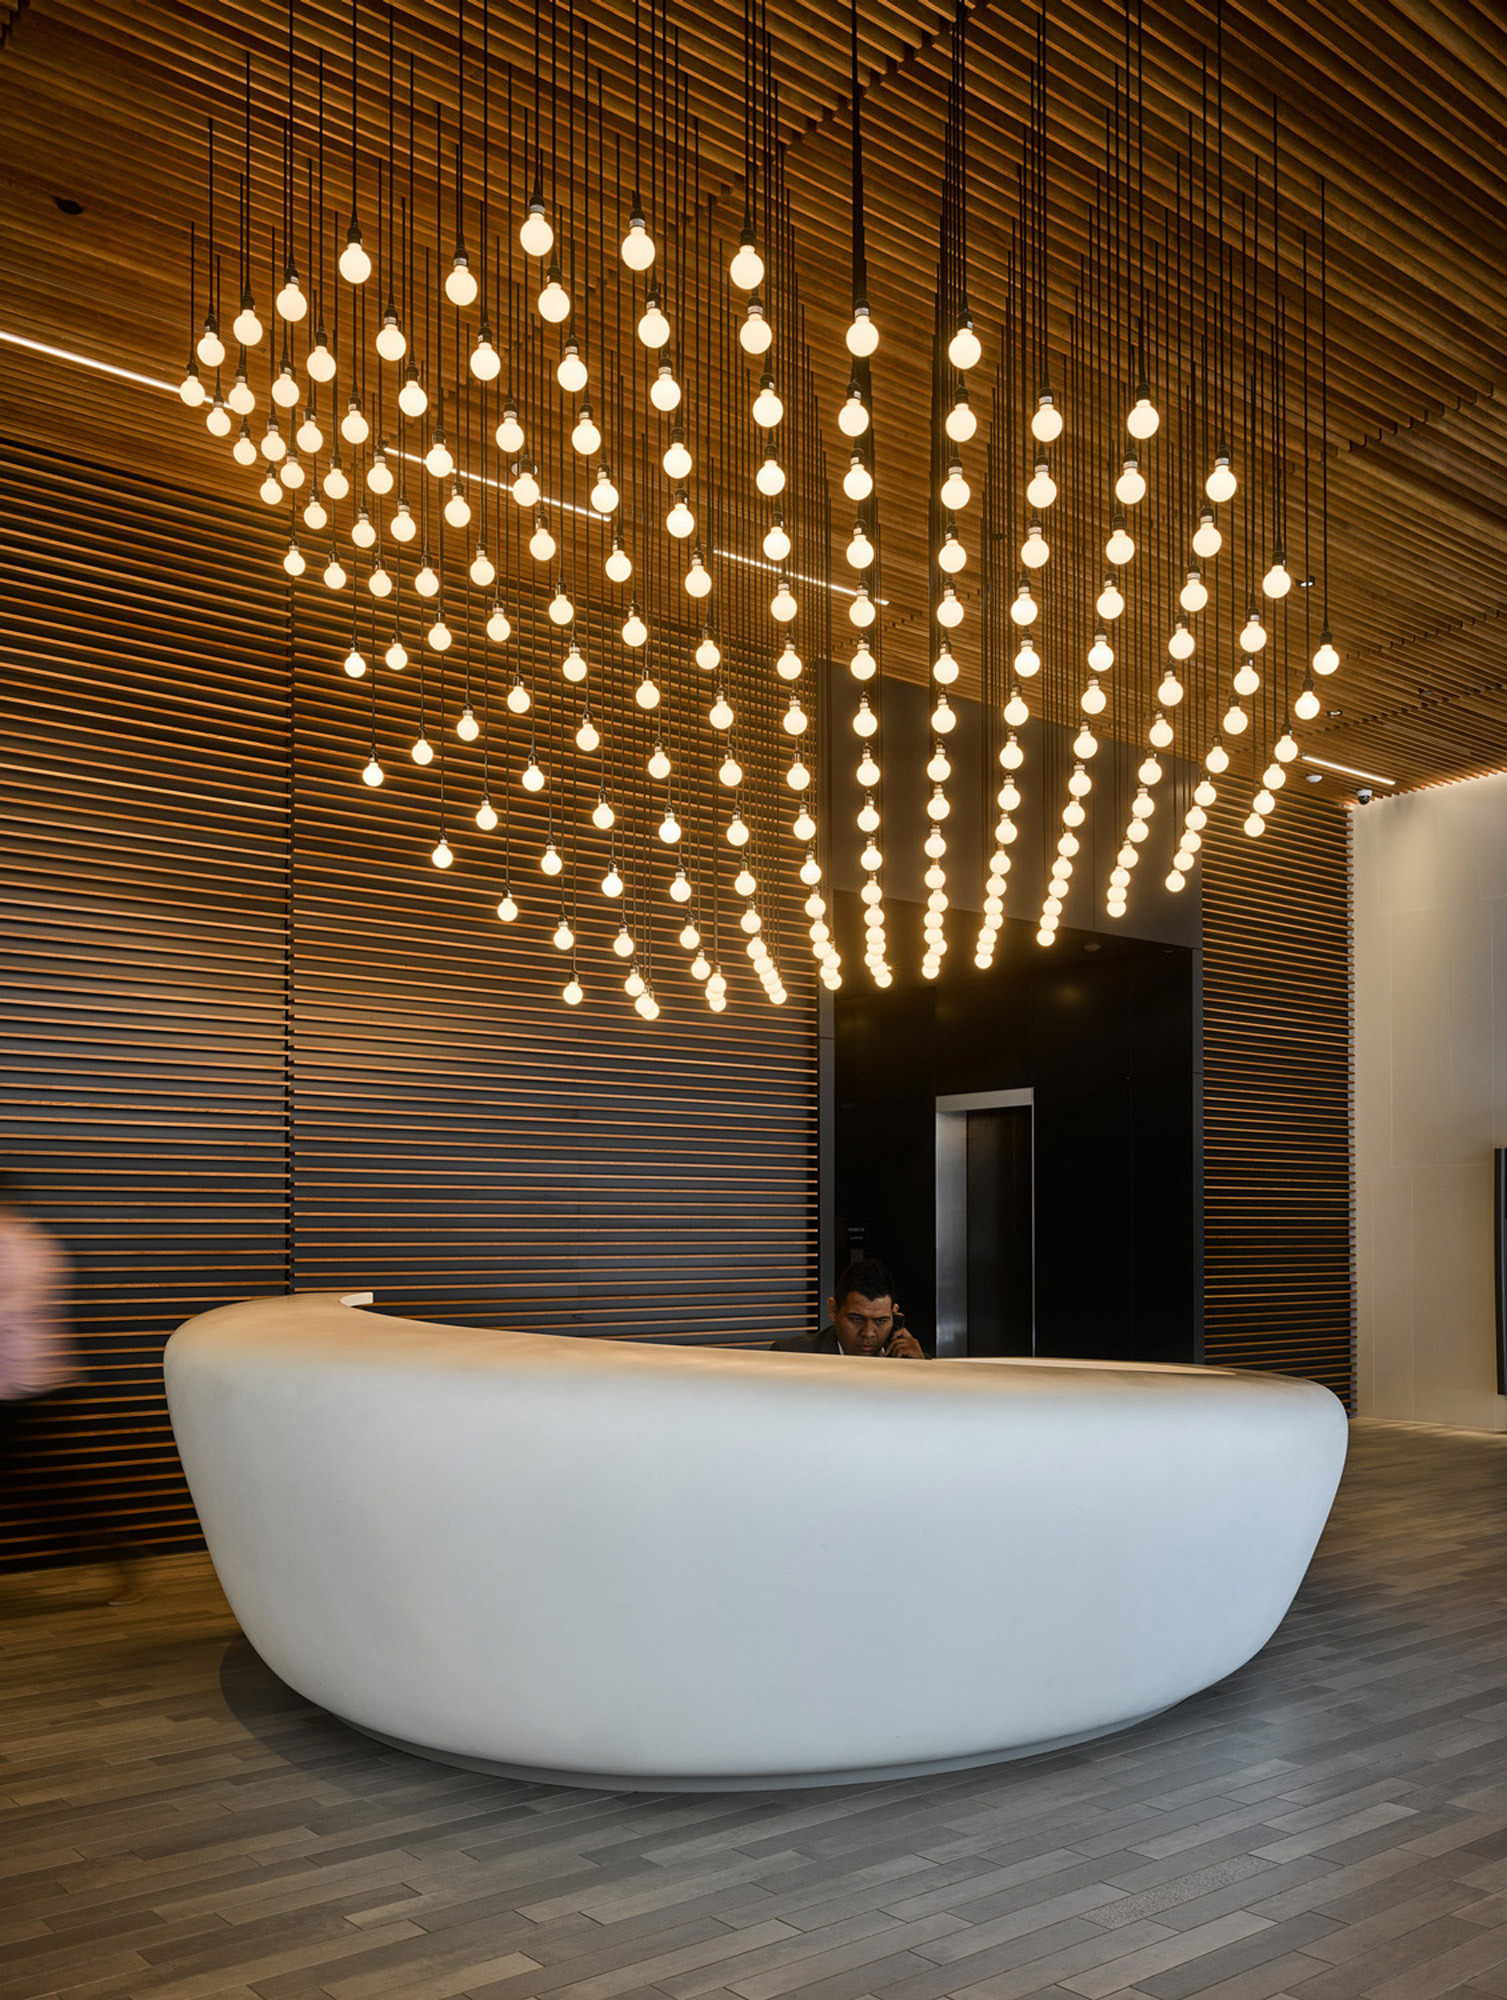 Modern reception area featuring a sleek, curved white desk against a backdrop of vertical wooden slats. Overhead, a striking array of suspended cylindrical lights forms a dynamic, cascading chandelier, enhancing the space with warmth and a contemporary aesthetic.